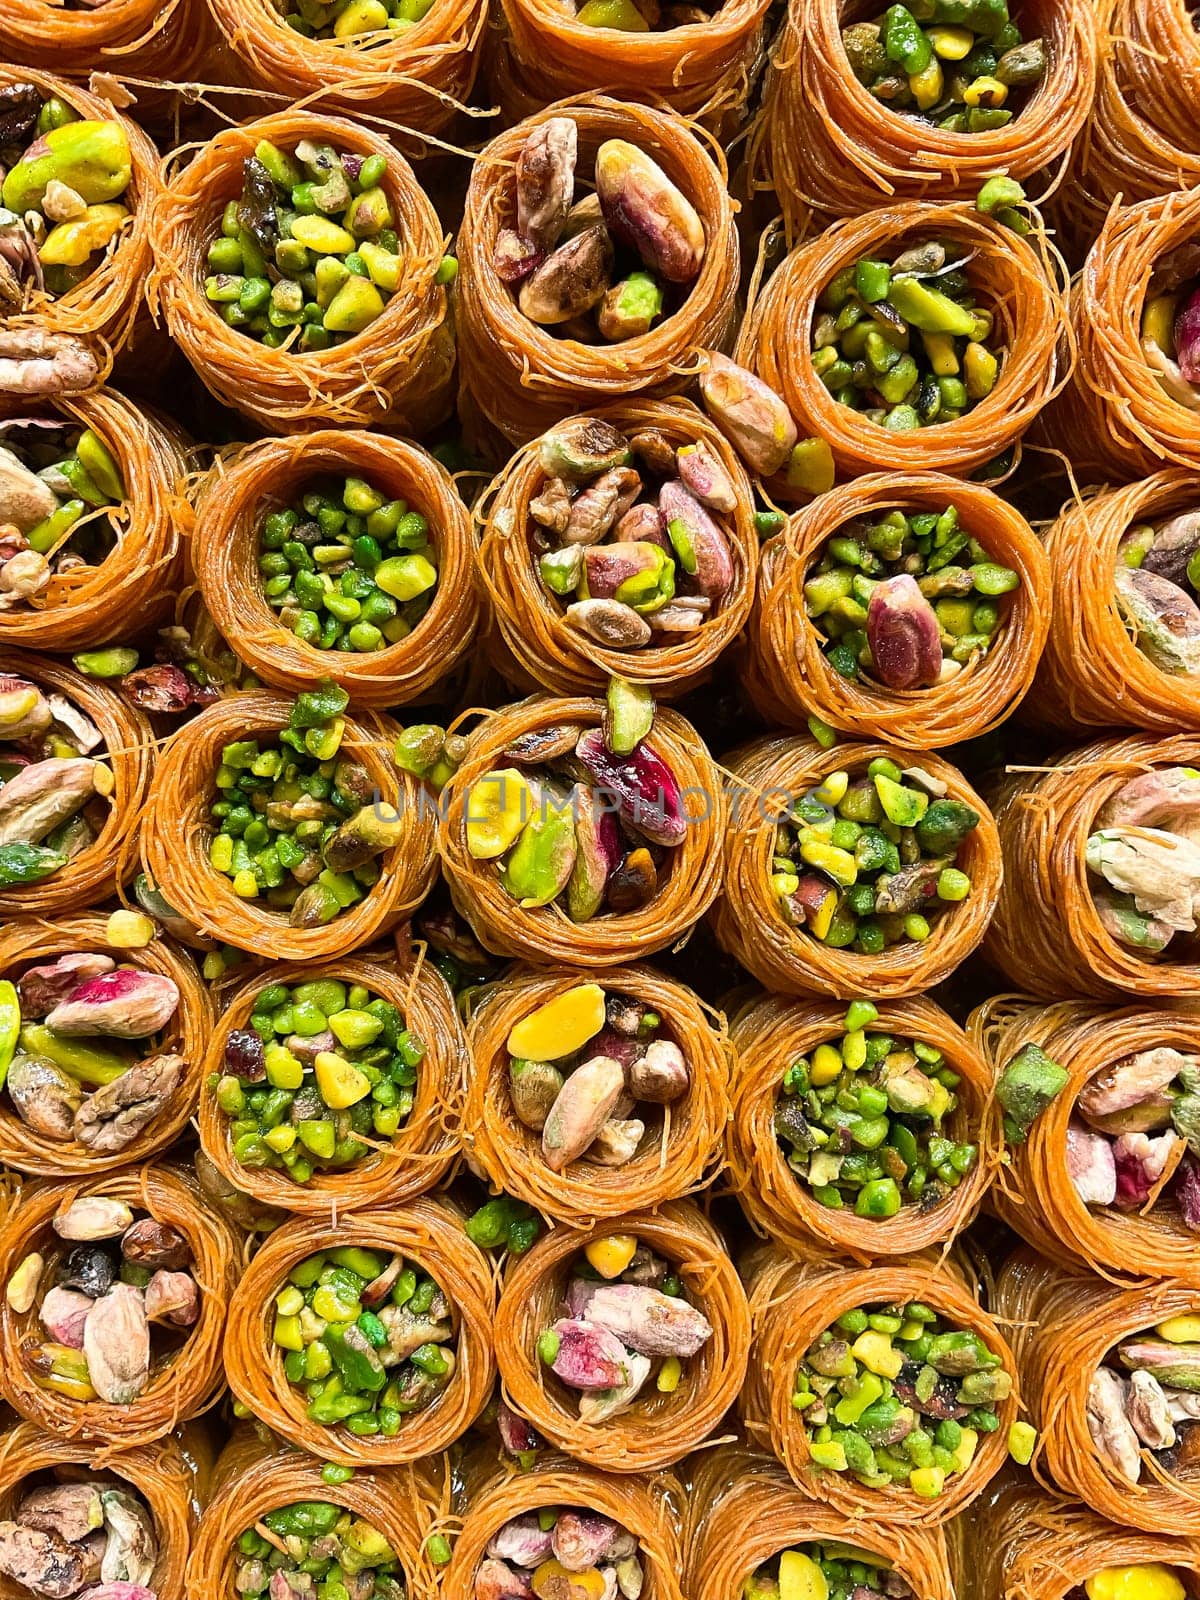 Oriental sweets close-up. Baklava with pistachios, walnuts, almonds. Photo for puzzles, postcards, articles, books.